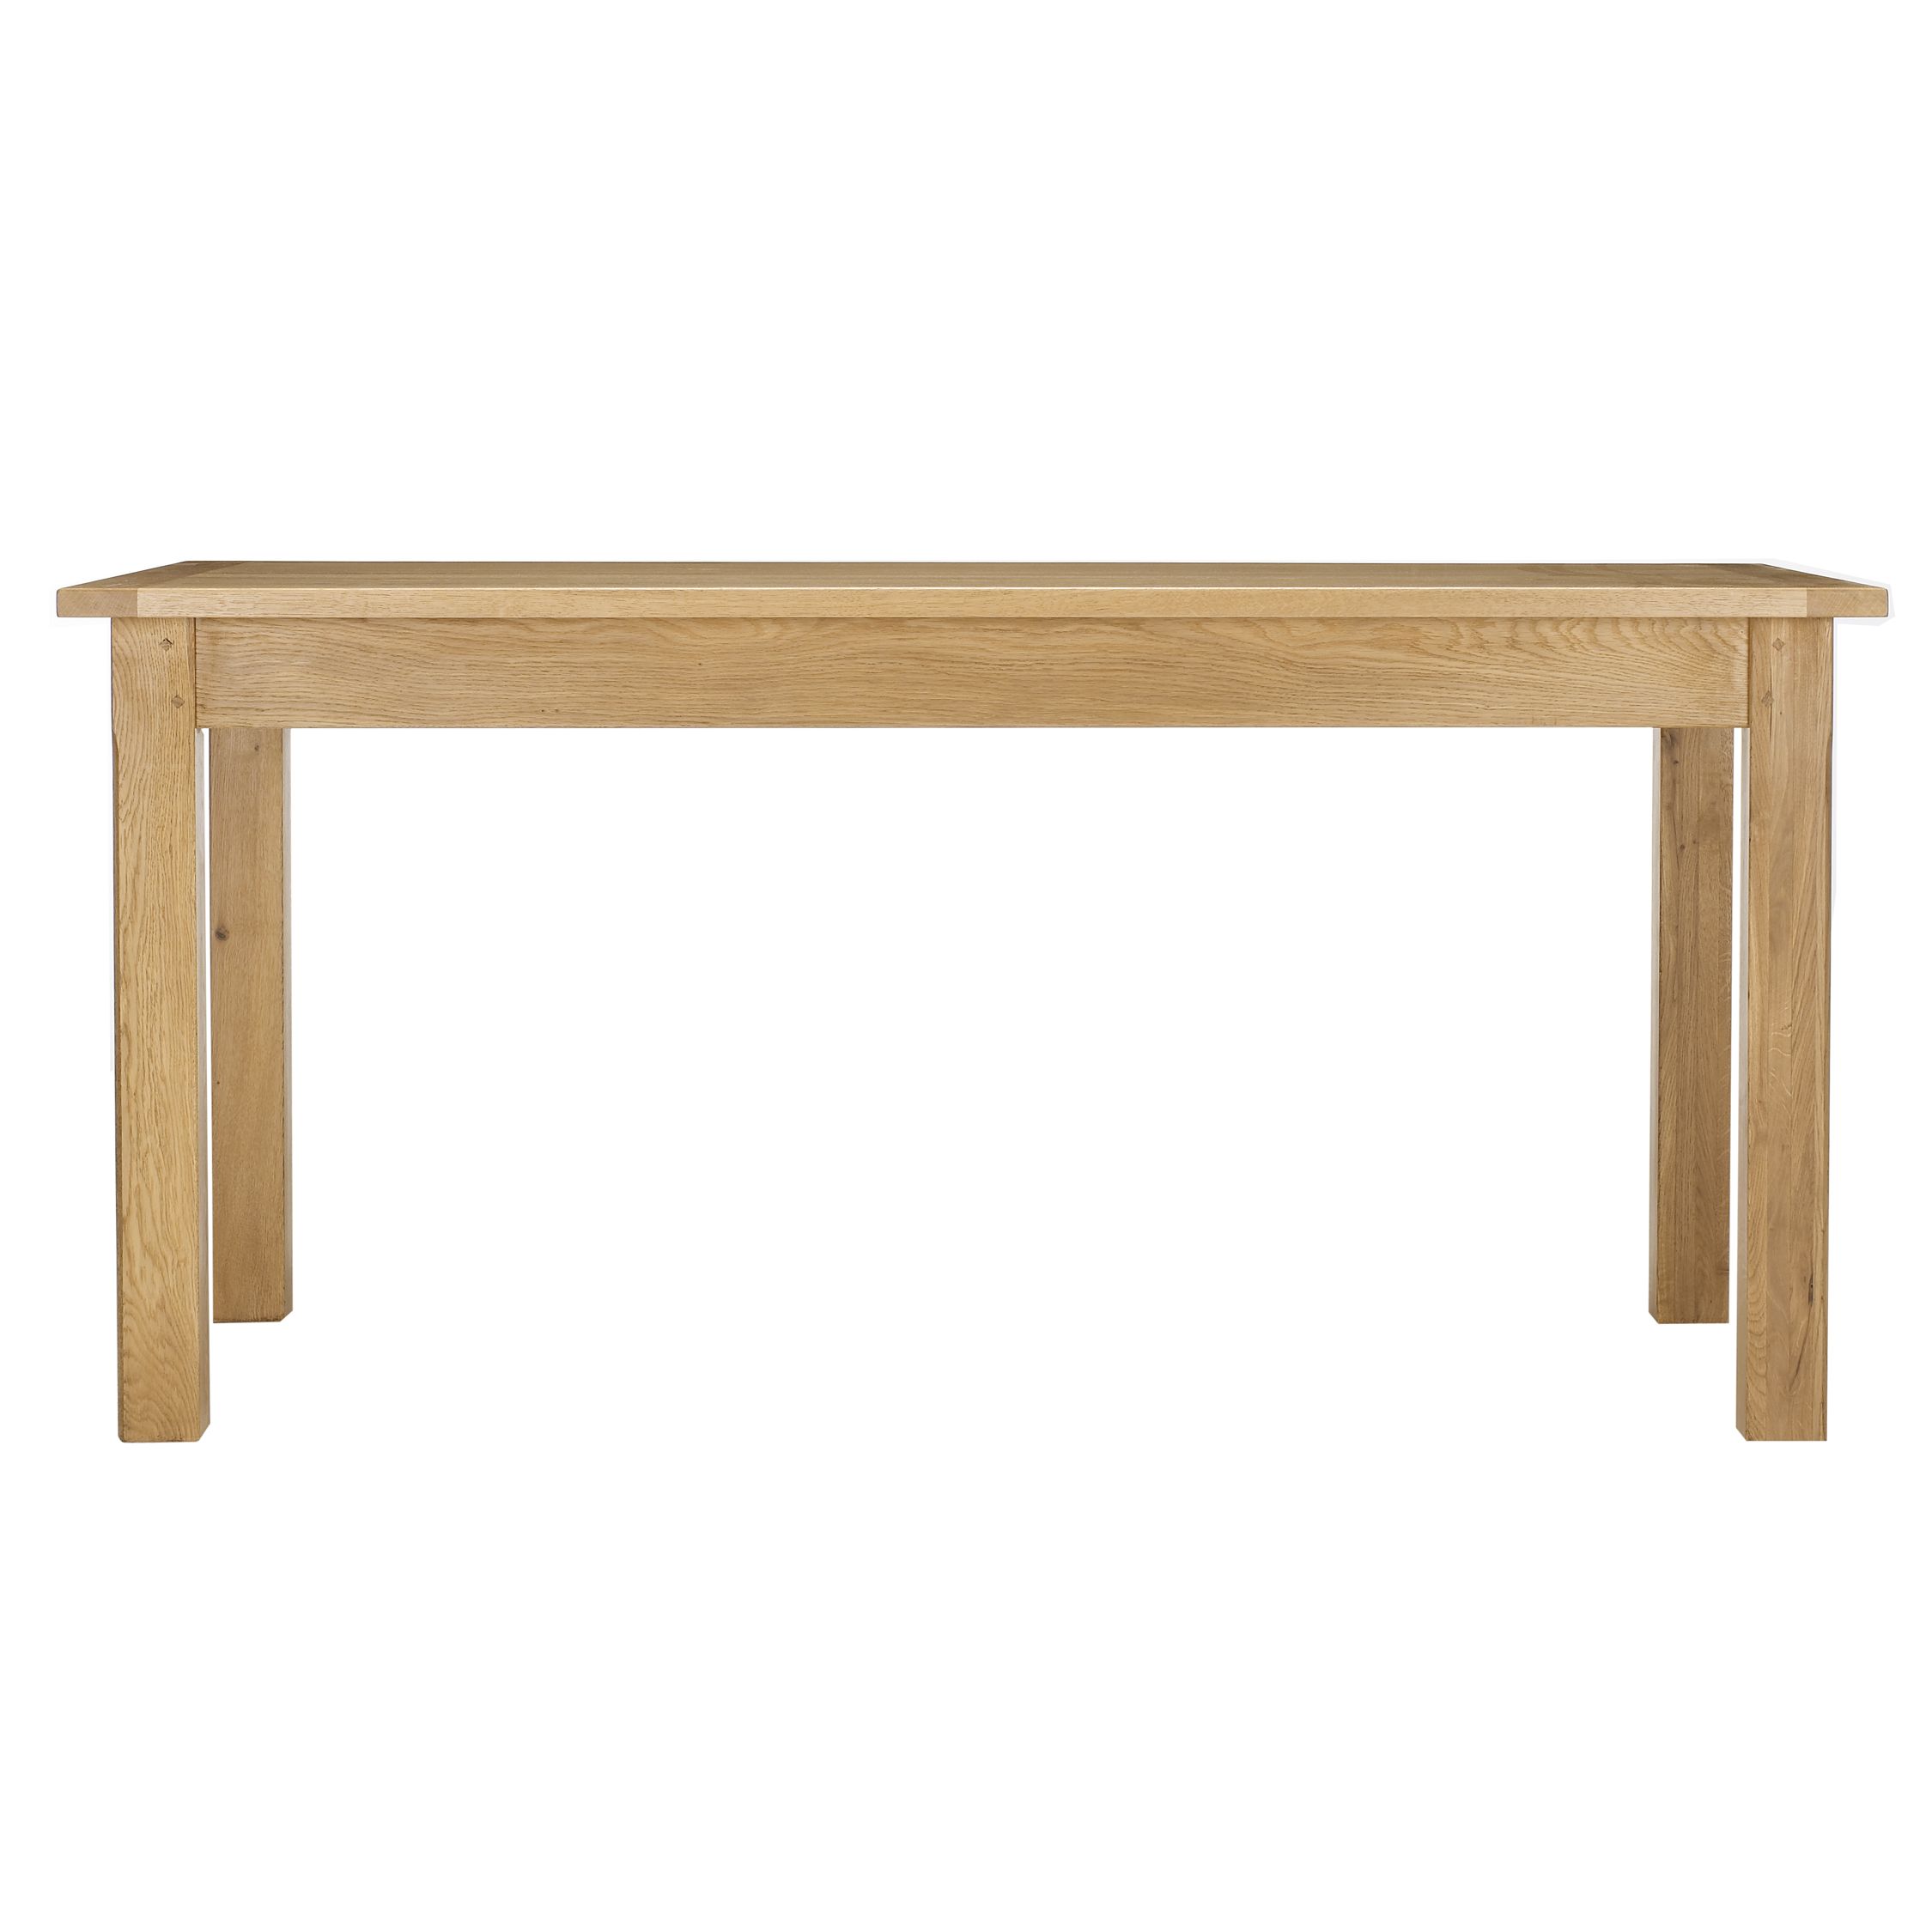 Ardennes Small Dining Table, Sarlat at JohnLewis